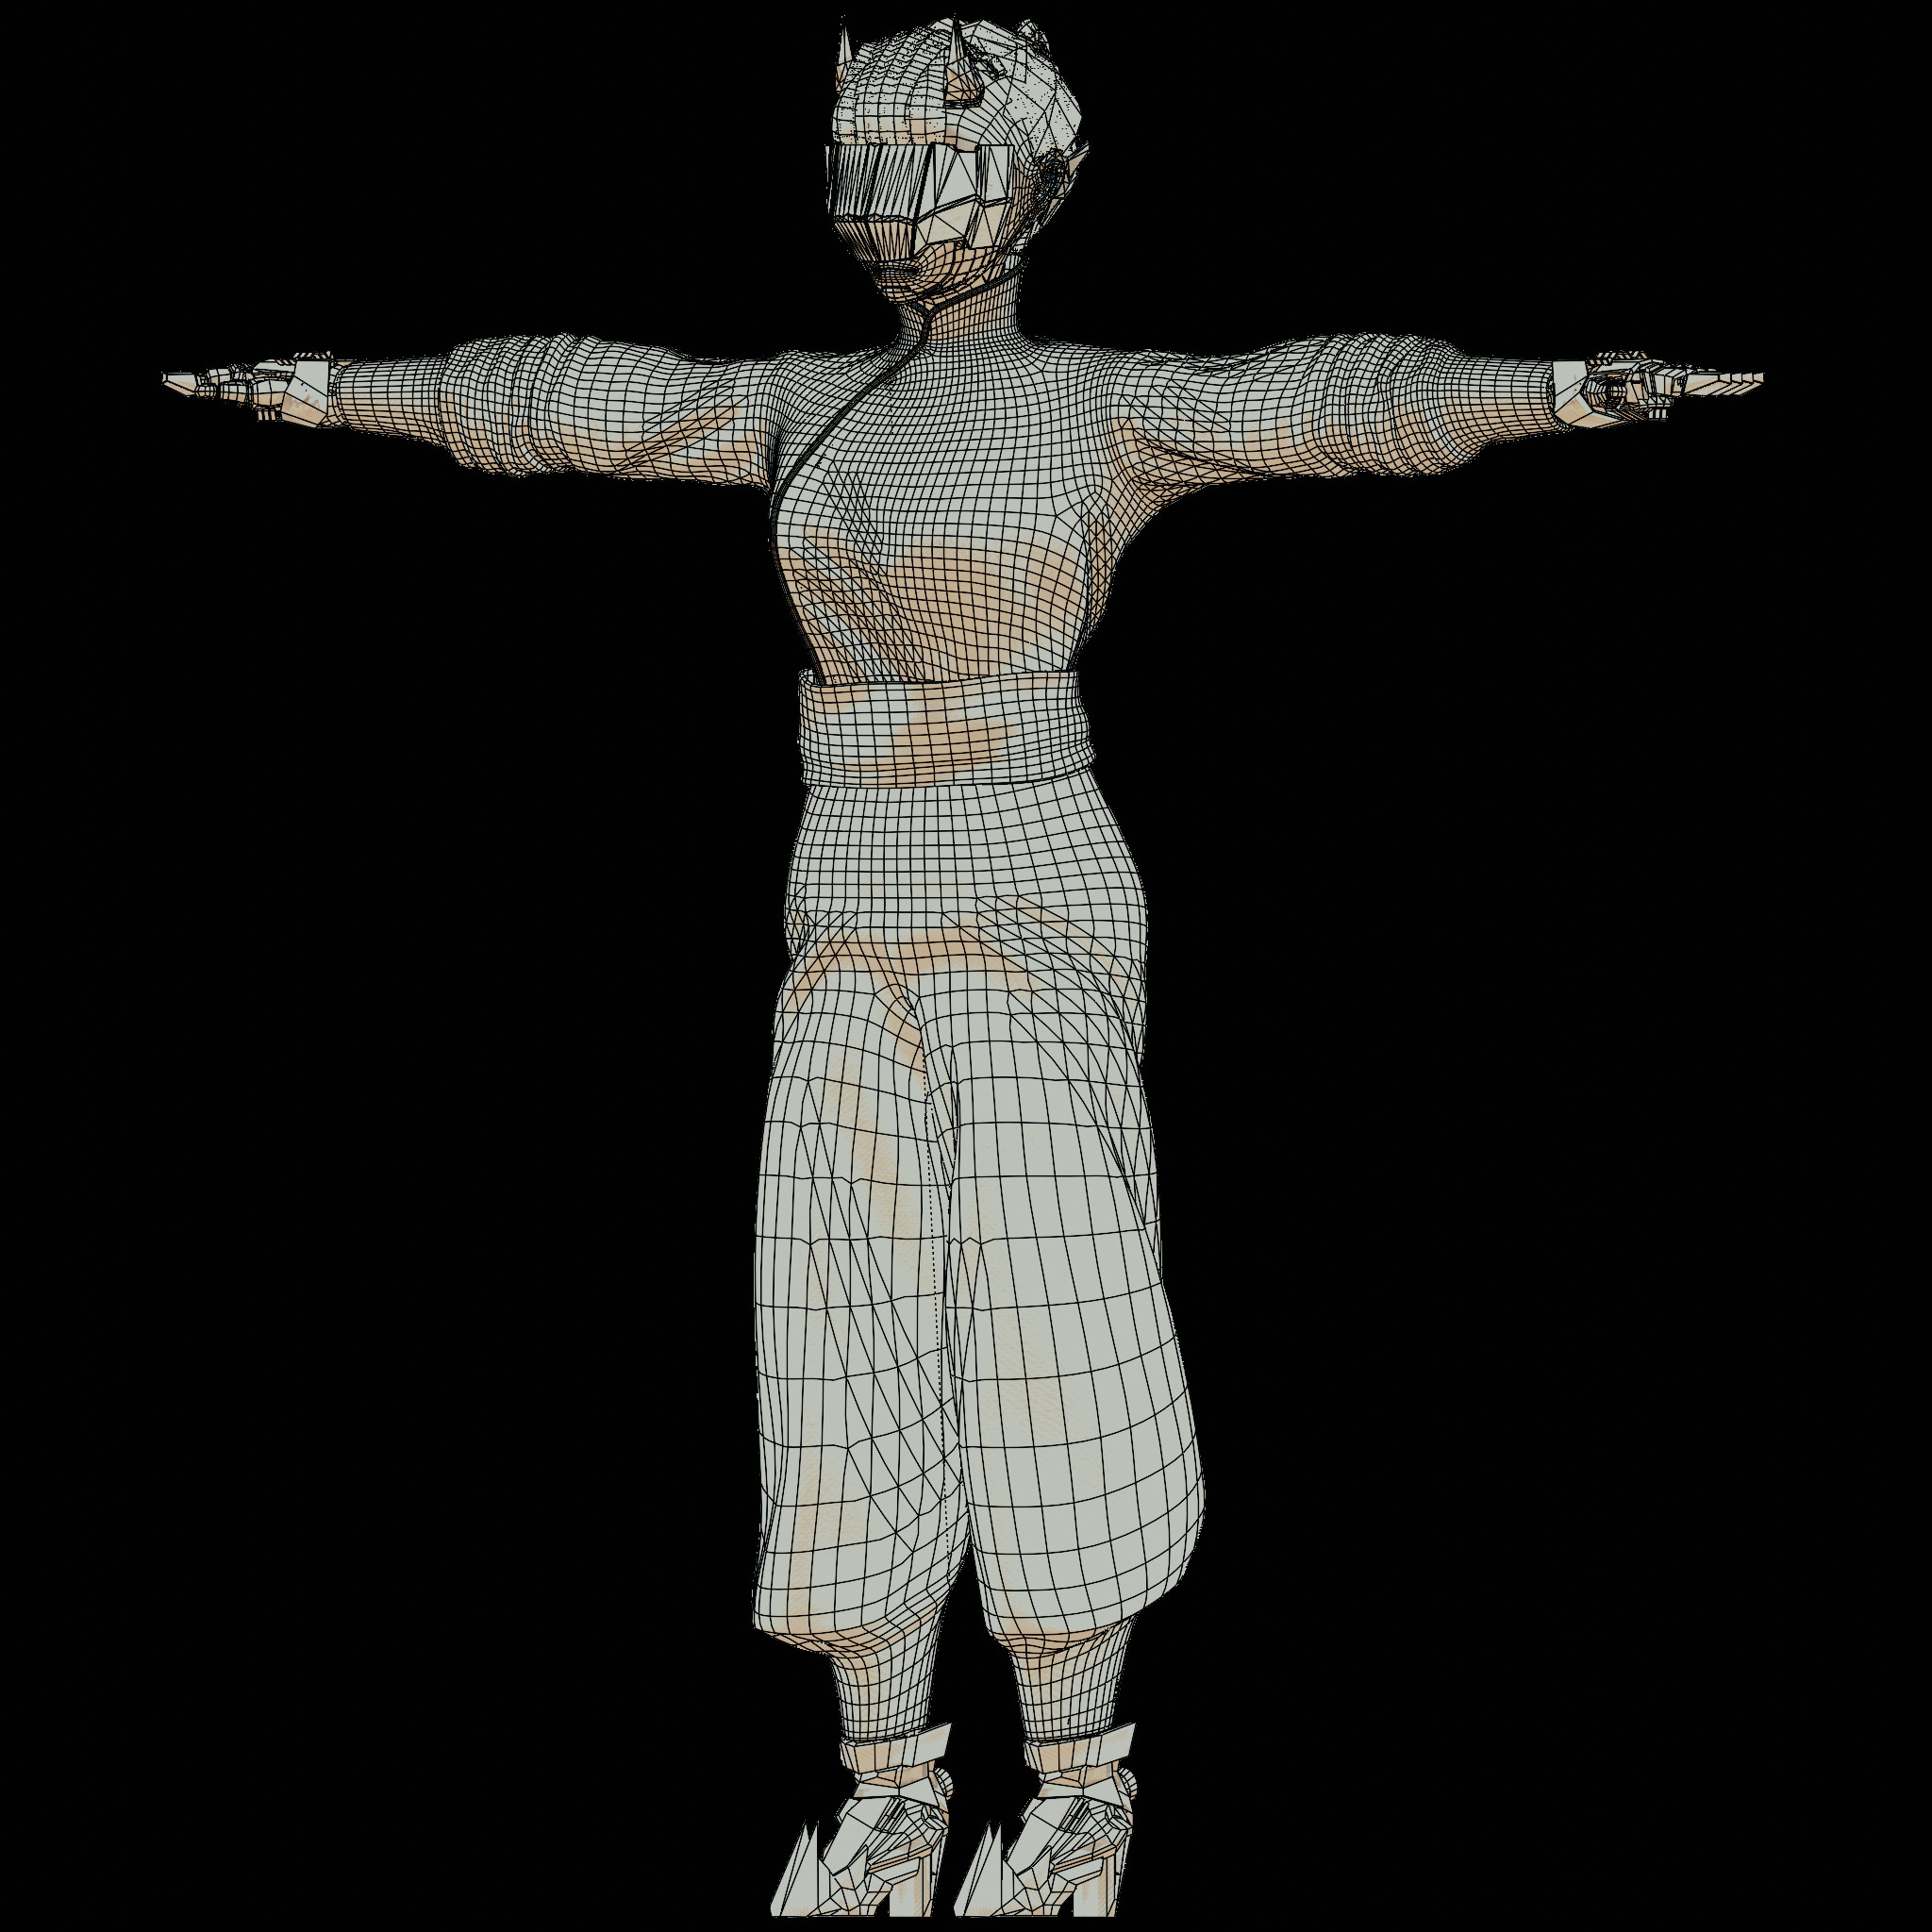 wireframe - some triangulation was in order to conform the folds properly. the details were sculpted multires and projected back down to the lowest subdiv. 